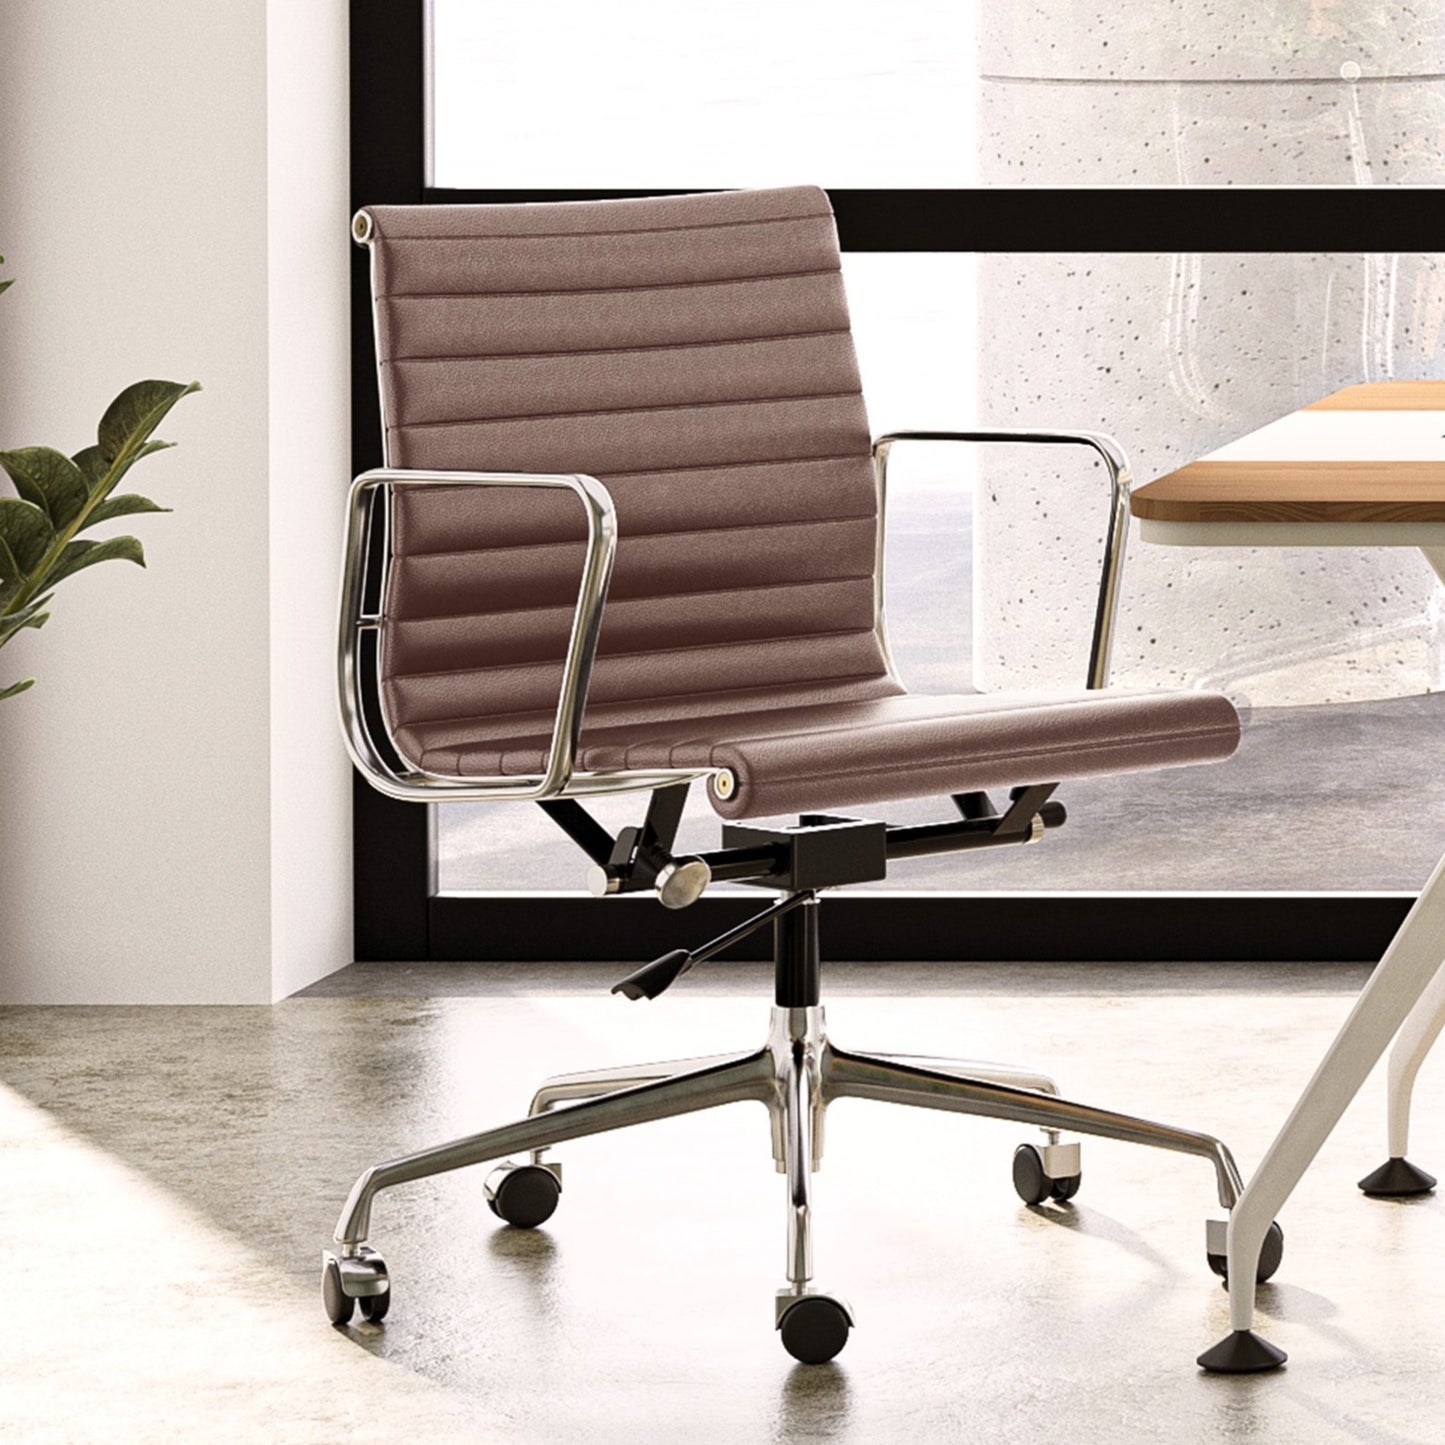 Luxuriance Designs - Eames Aluminum Group Chair - Brown Color and Low Back - Review